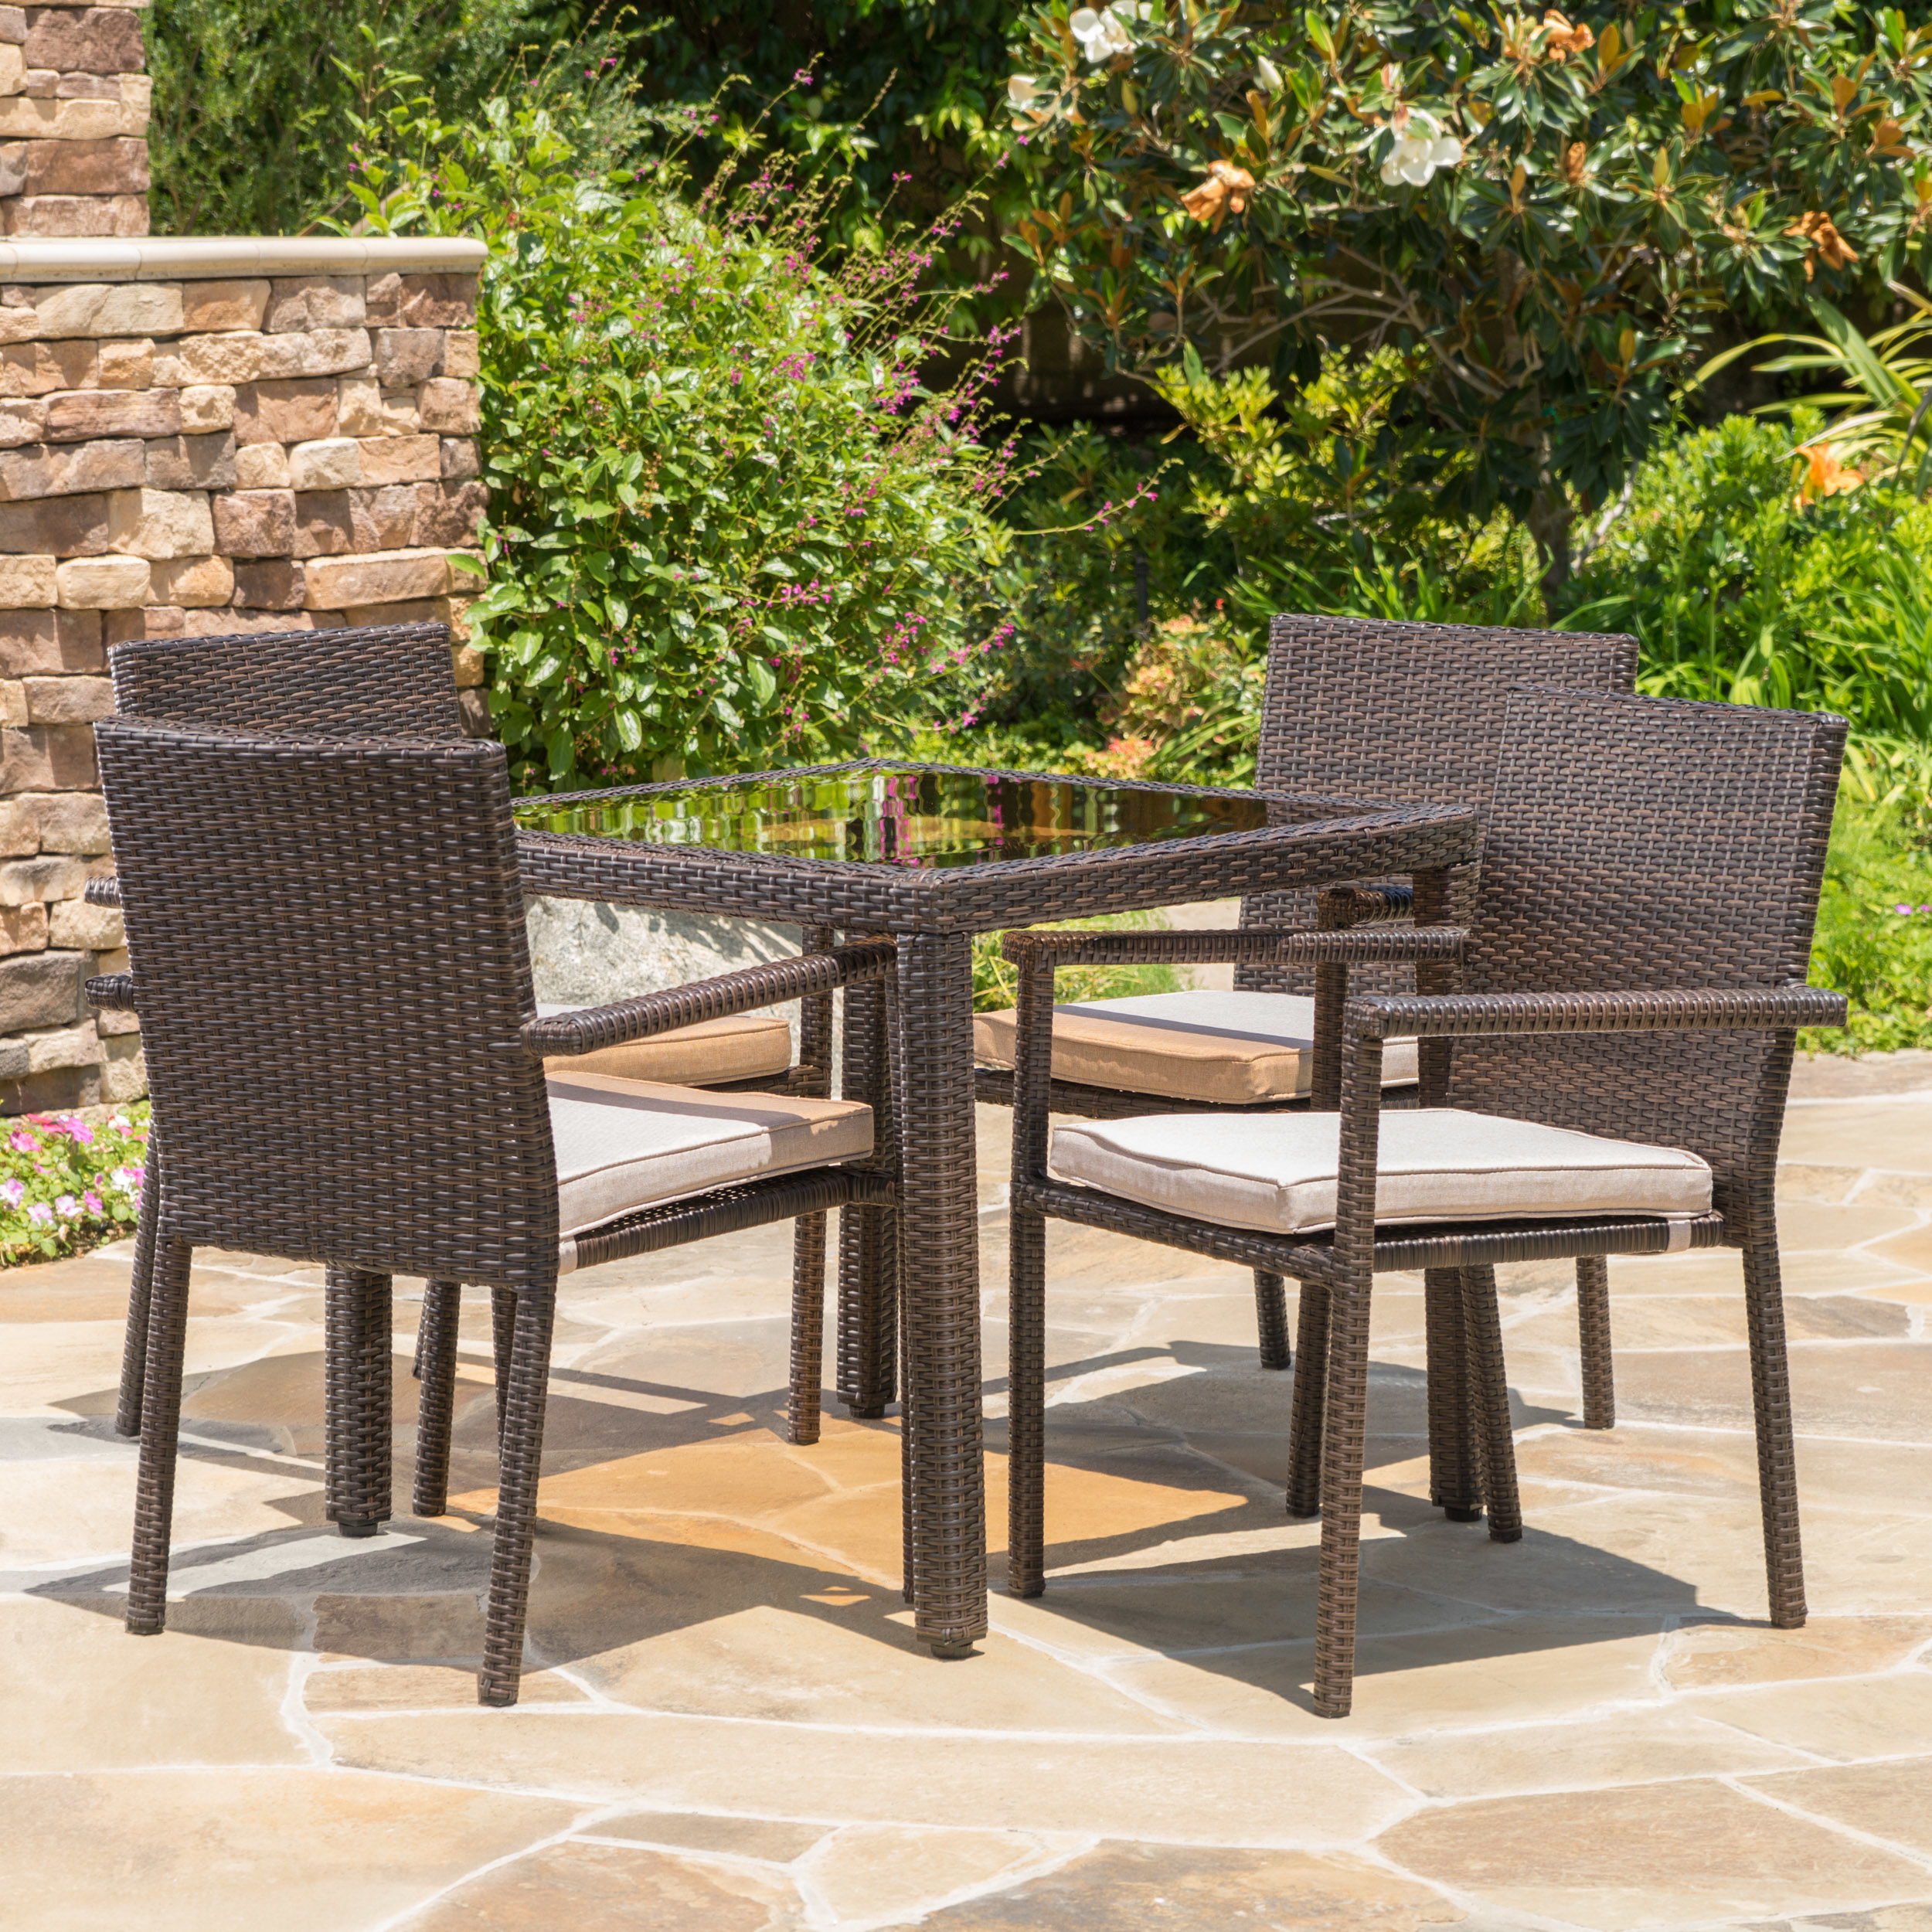 San Tropez Outdoor 5 Piece Dining Set With Water Resistant Cushions - Multi-brown/Textured Beige